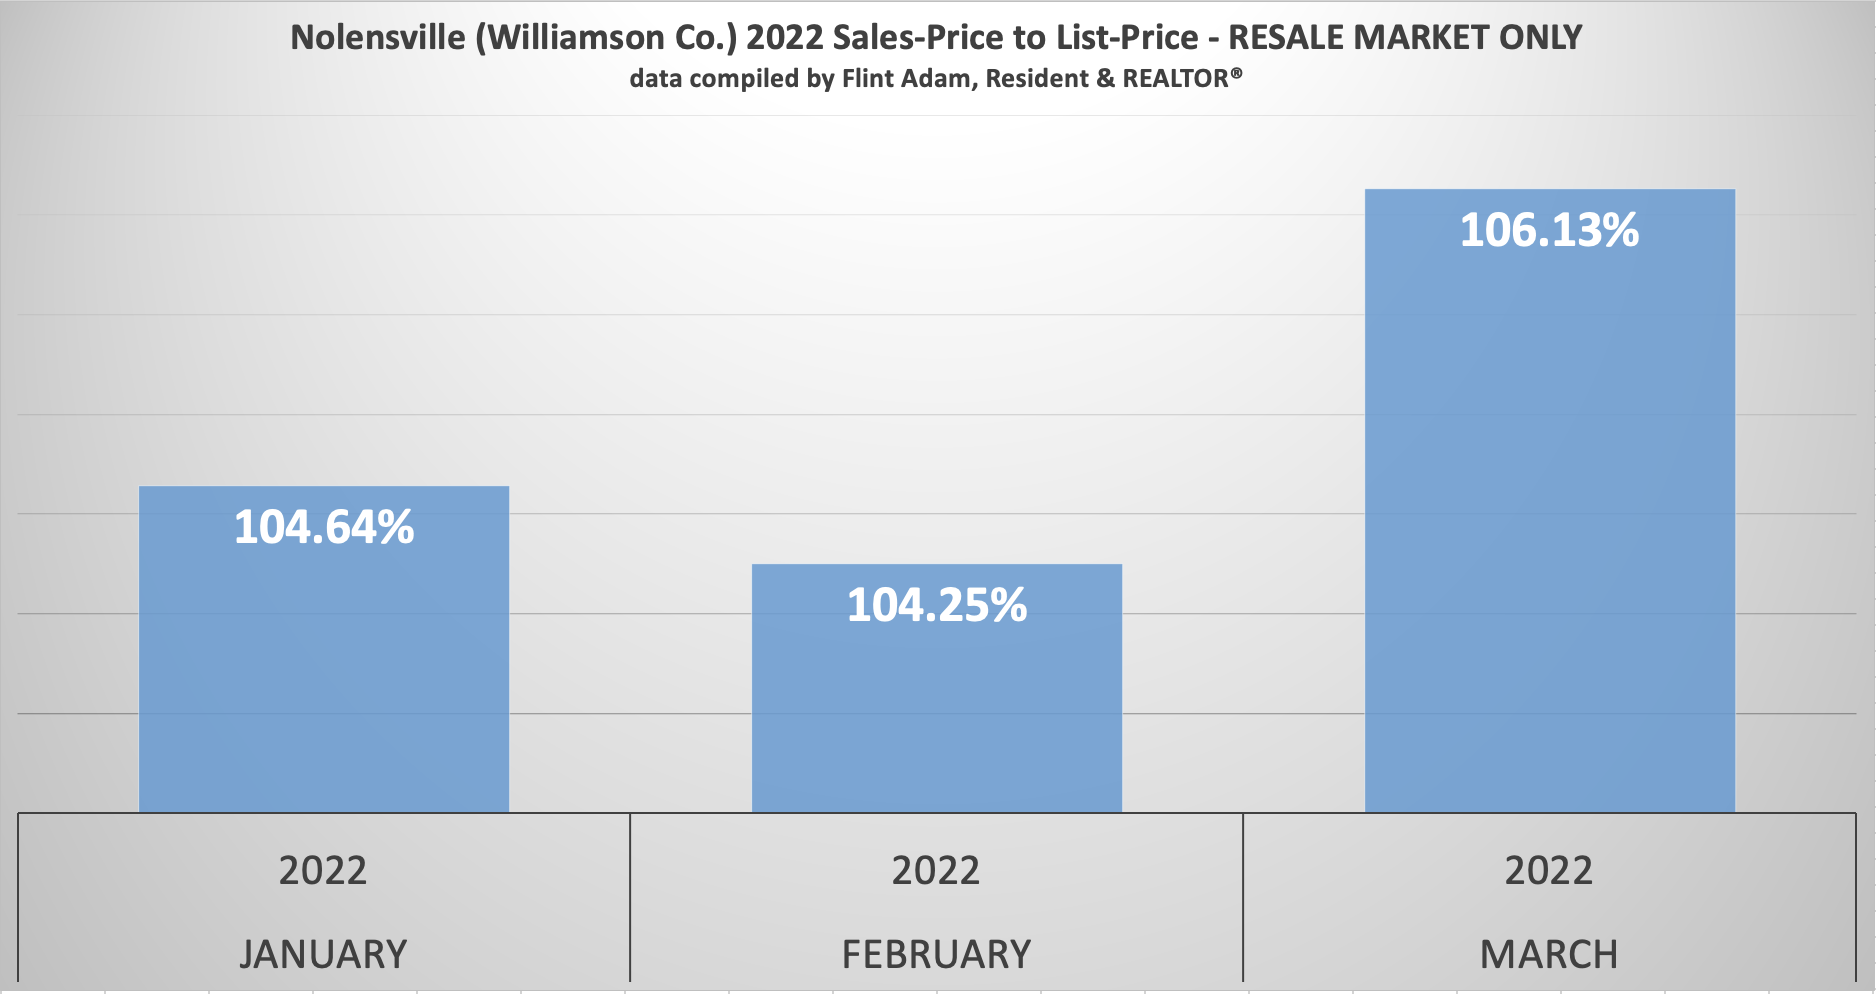 Nolensville TN (Williamson Co.) Sales Price to List Price Ratios for the Existing Homes Market - January through March 2022